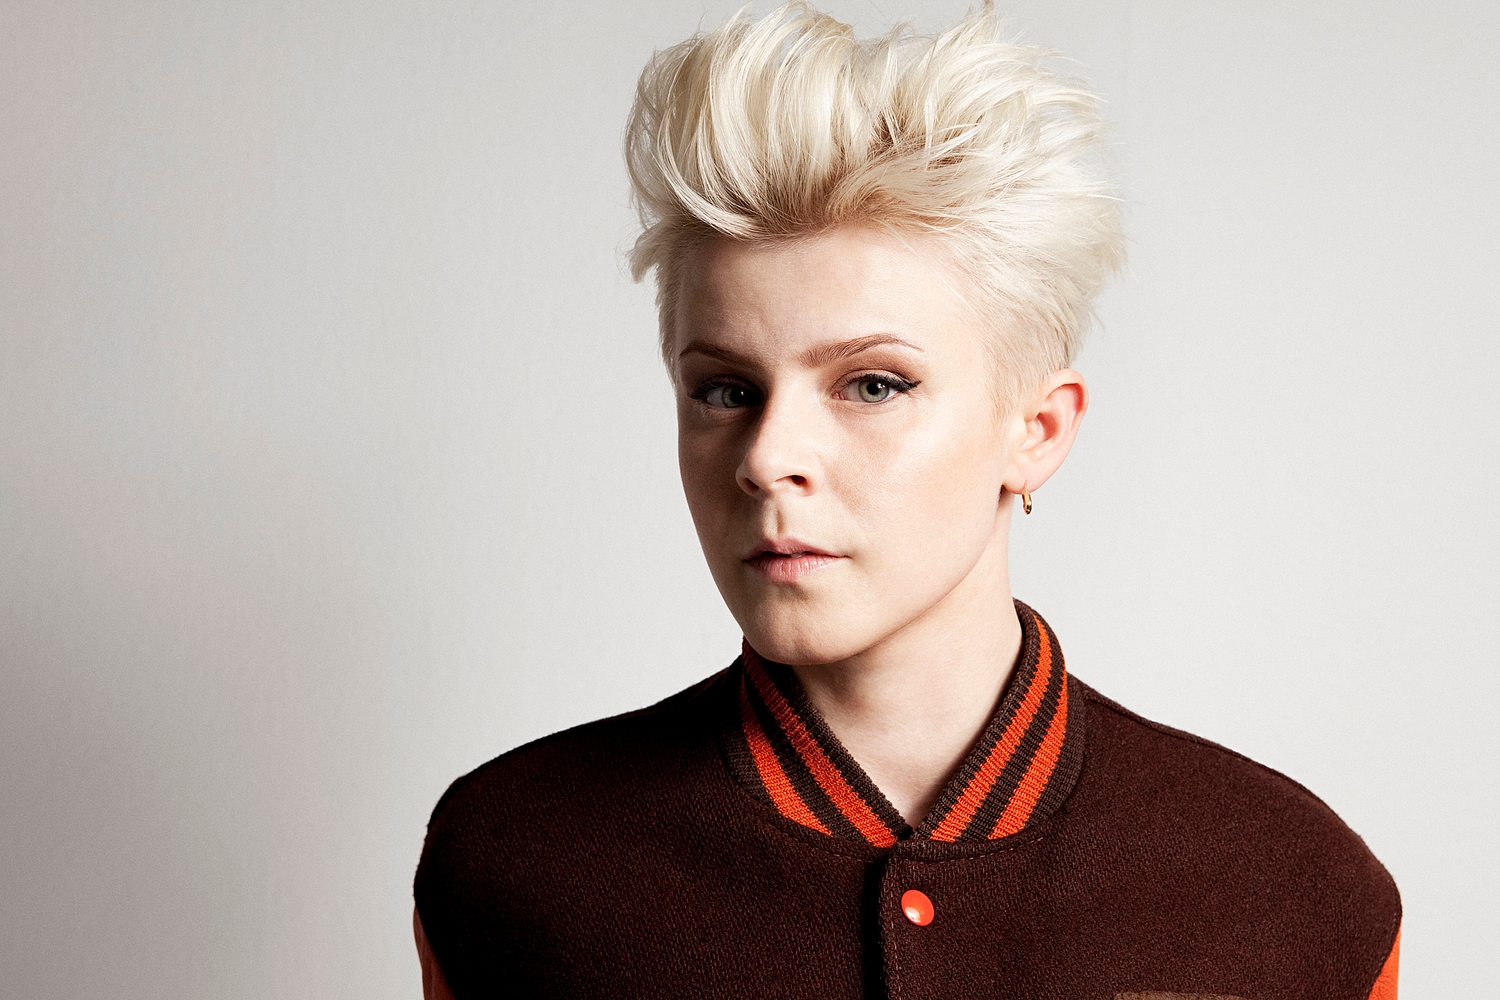 Robyn & La Bagatelle Magique share debut track ‘Love Is Free’